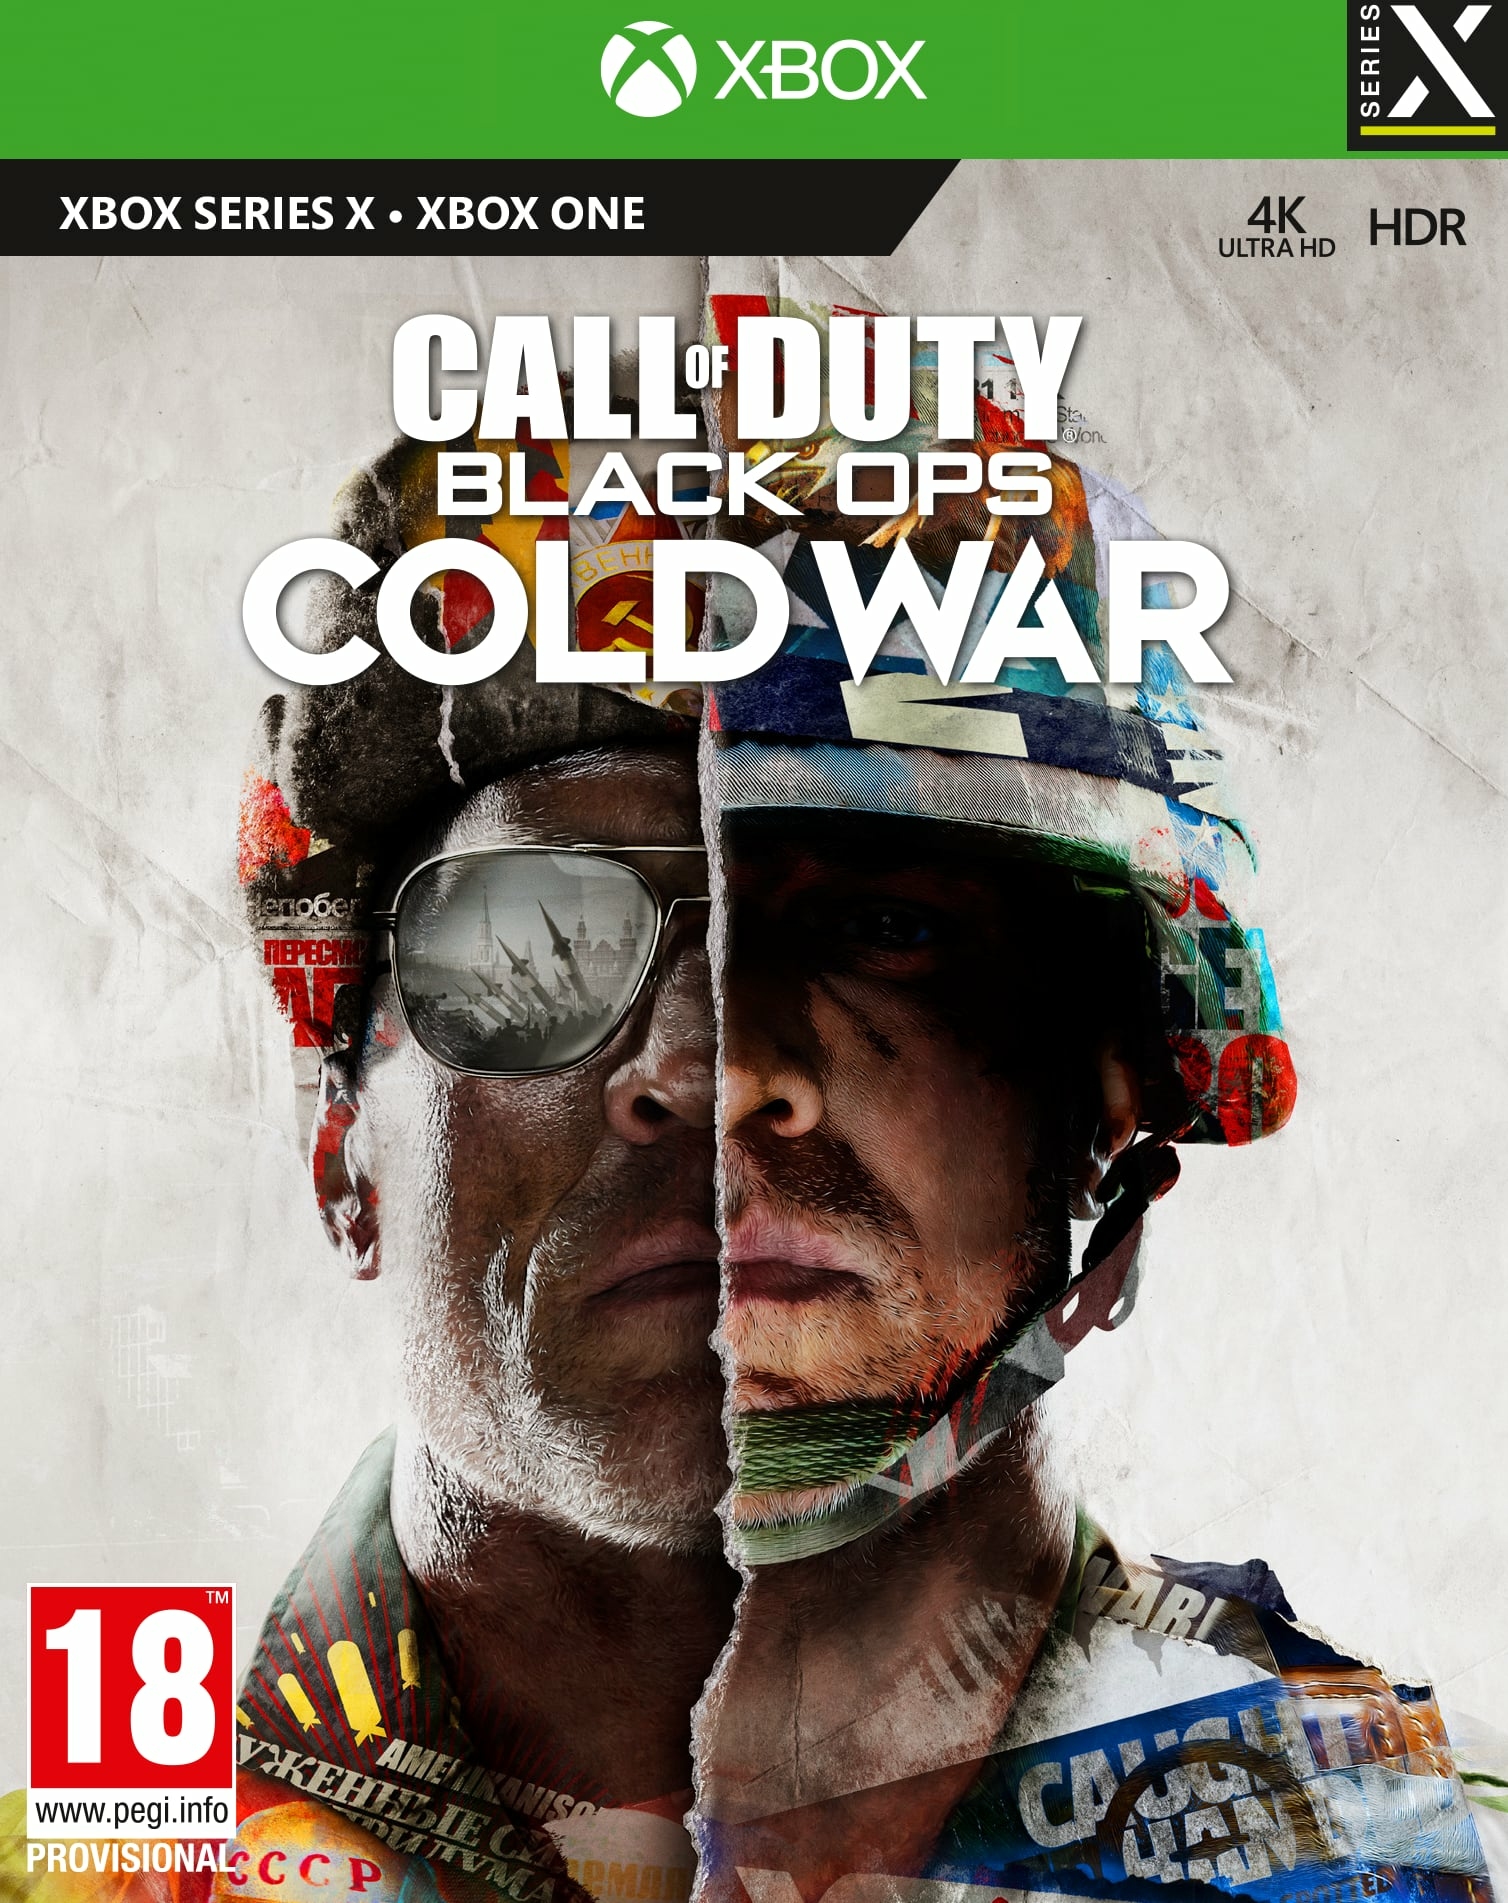 Call of duty black ops cold war - Jeux Xbox Series X